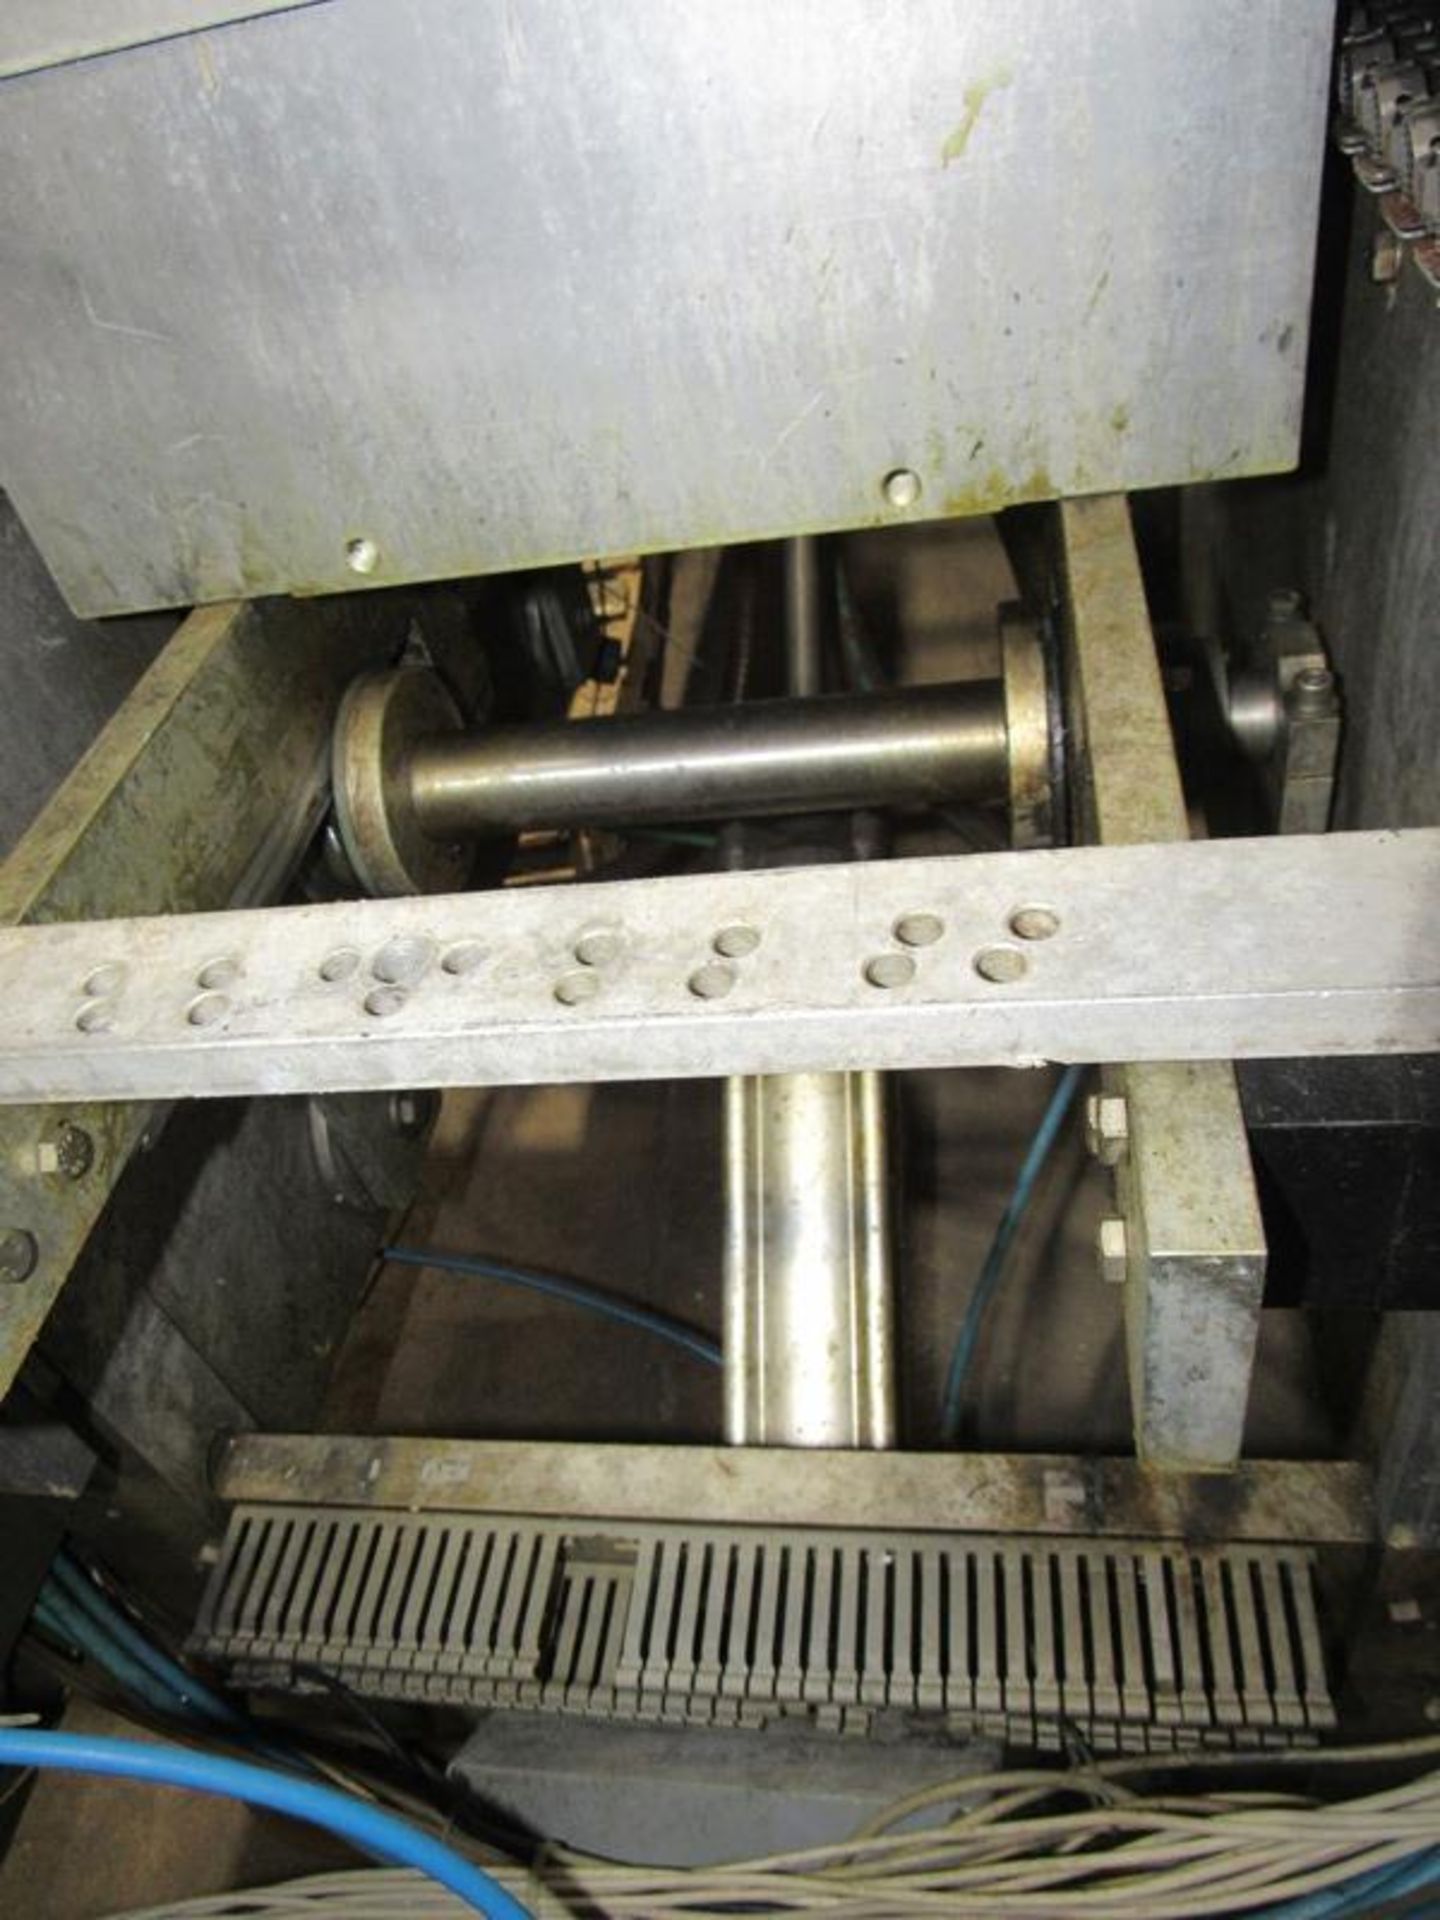 Multivac Rollstock Thermoformer Packaging Machine, 16 5/8" between chains, approx. 13 1/2" - Image 13 of 25